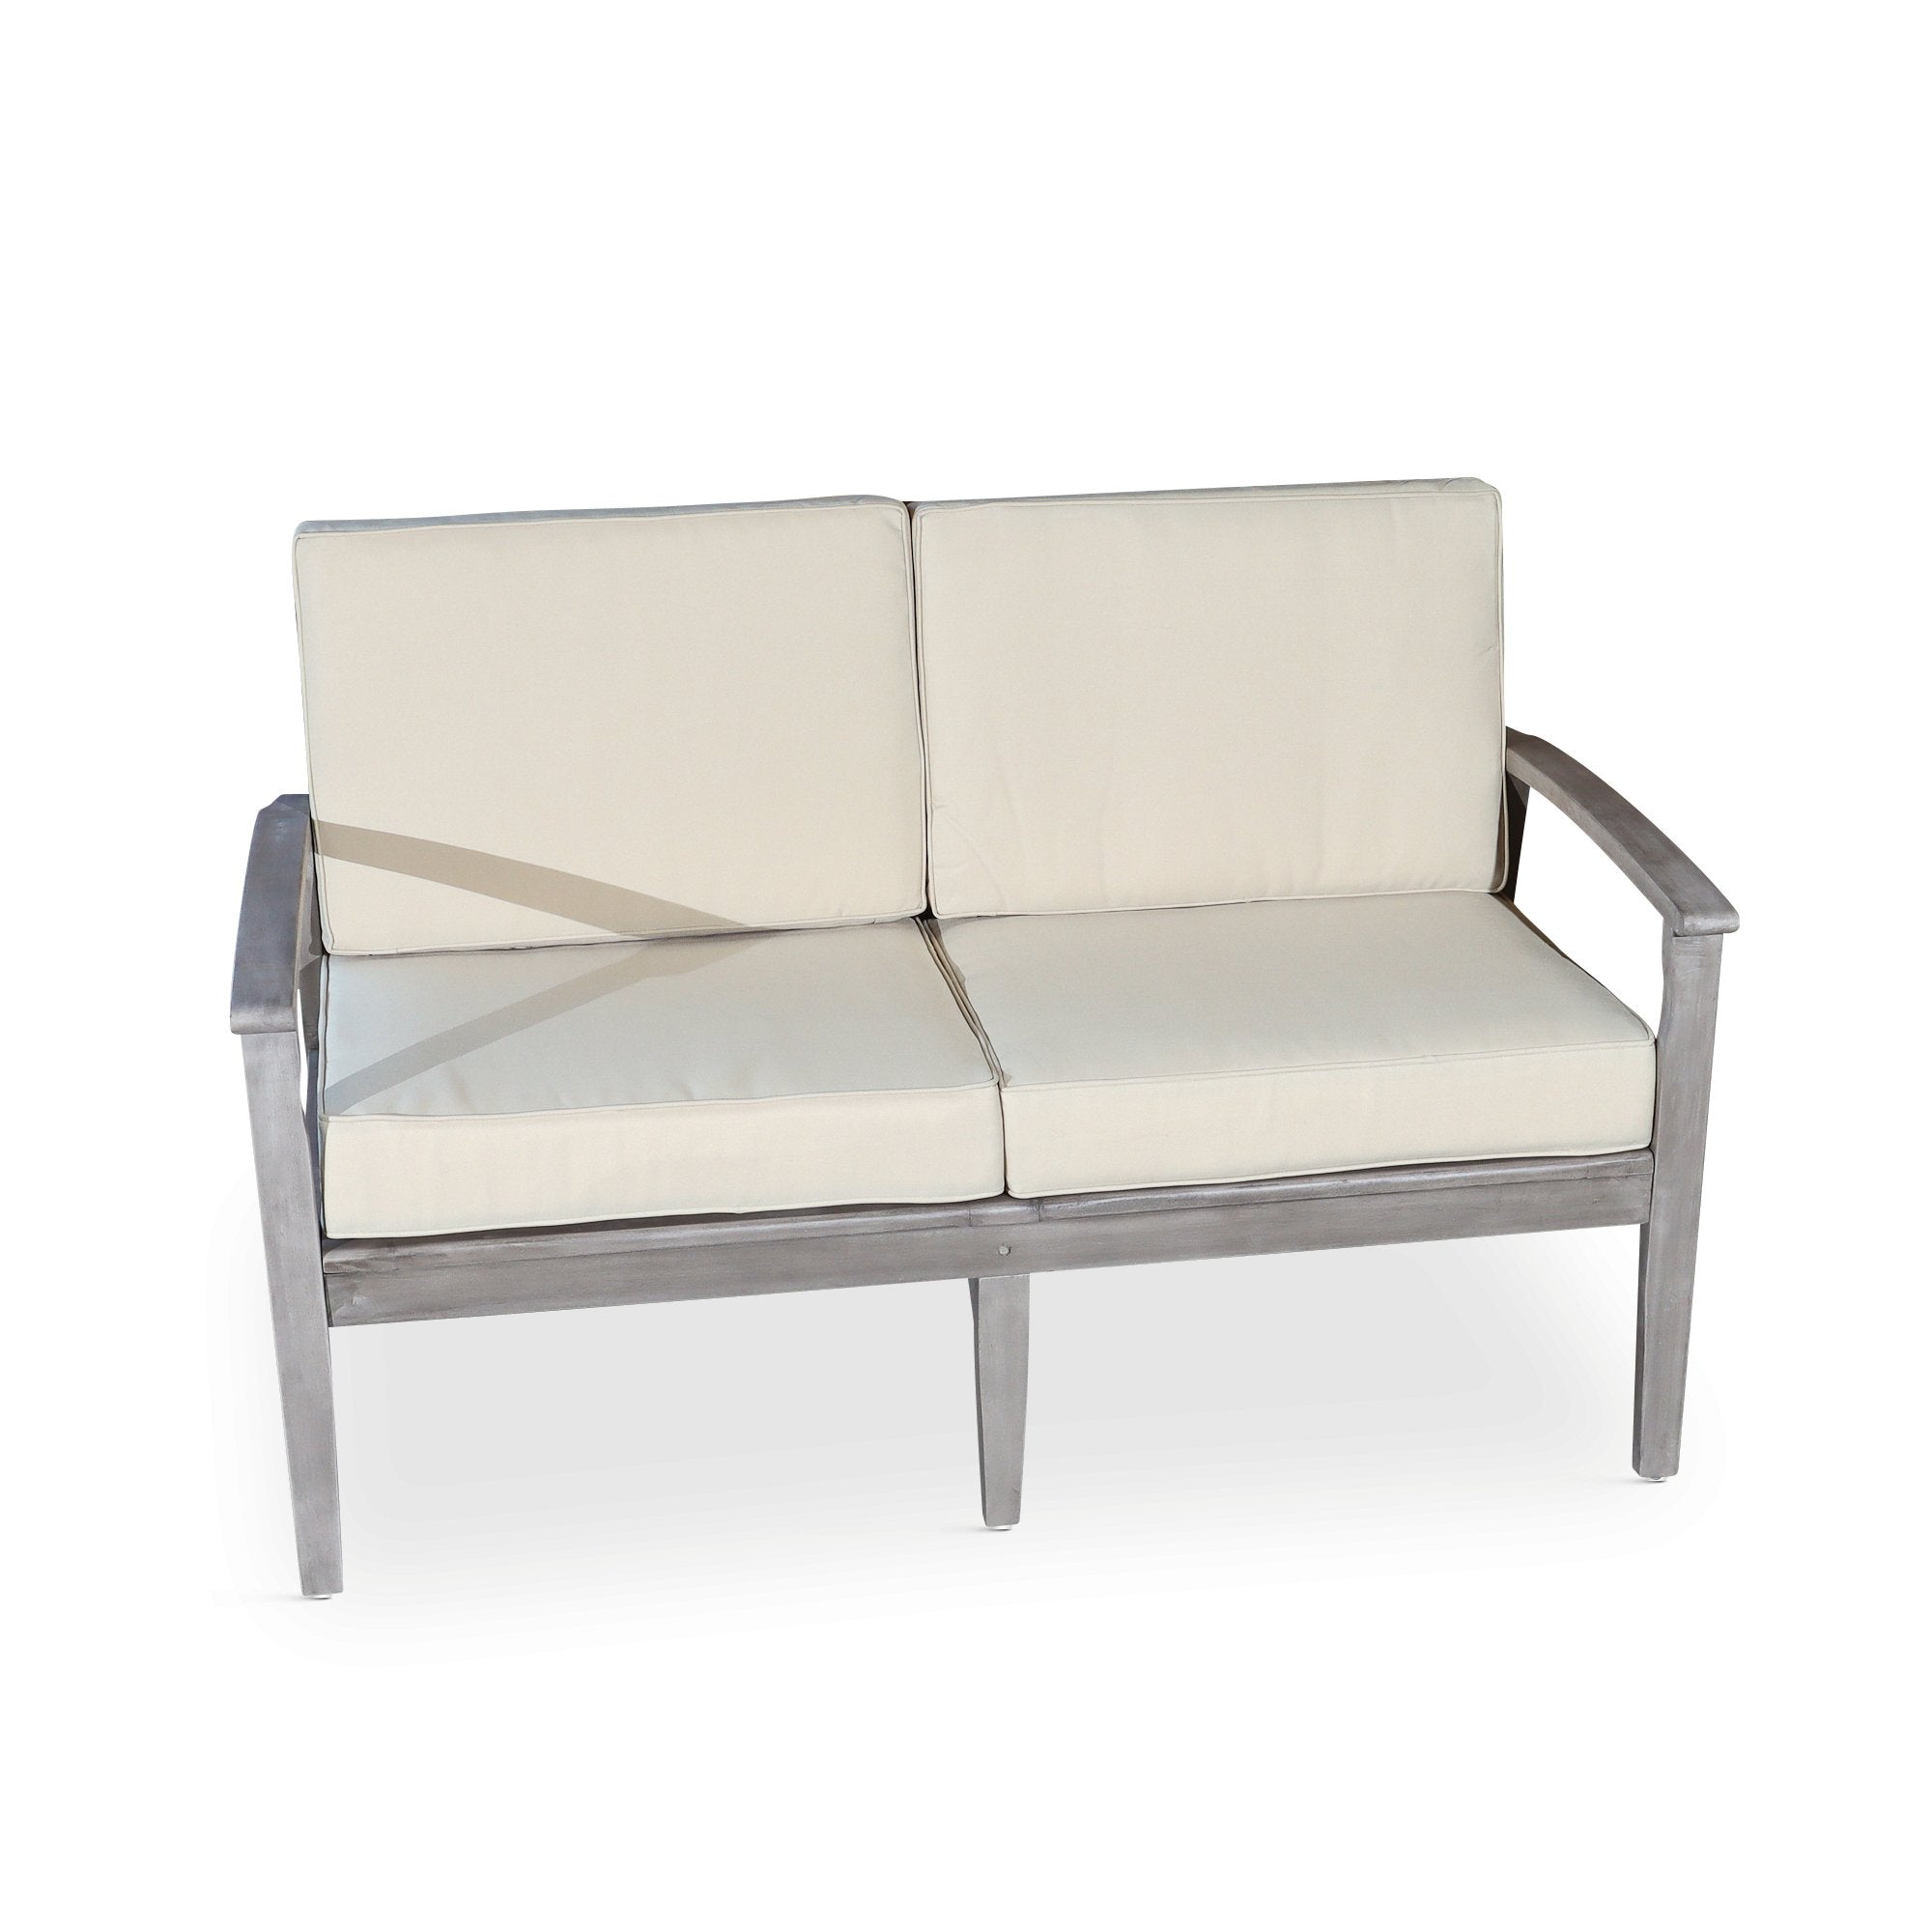 Outdoor Loveseat with Cushions, Silver Gray Finish, Sand Cushions - Tuesday Morning-Chairs & Seating